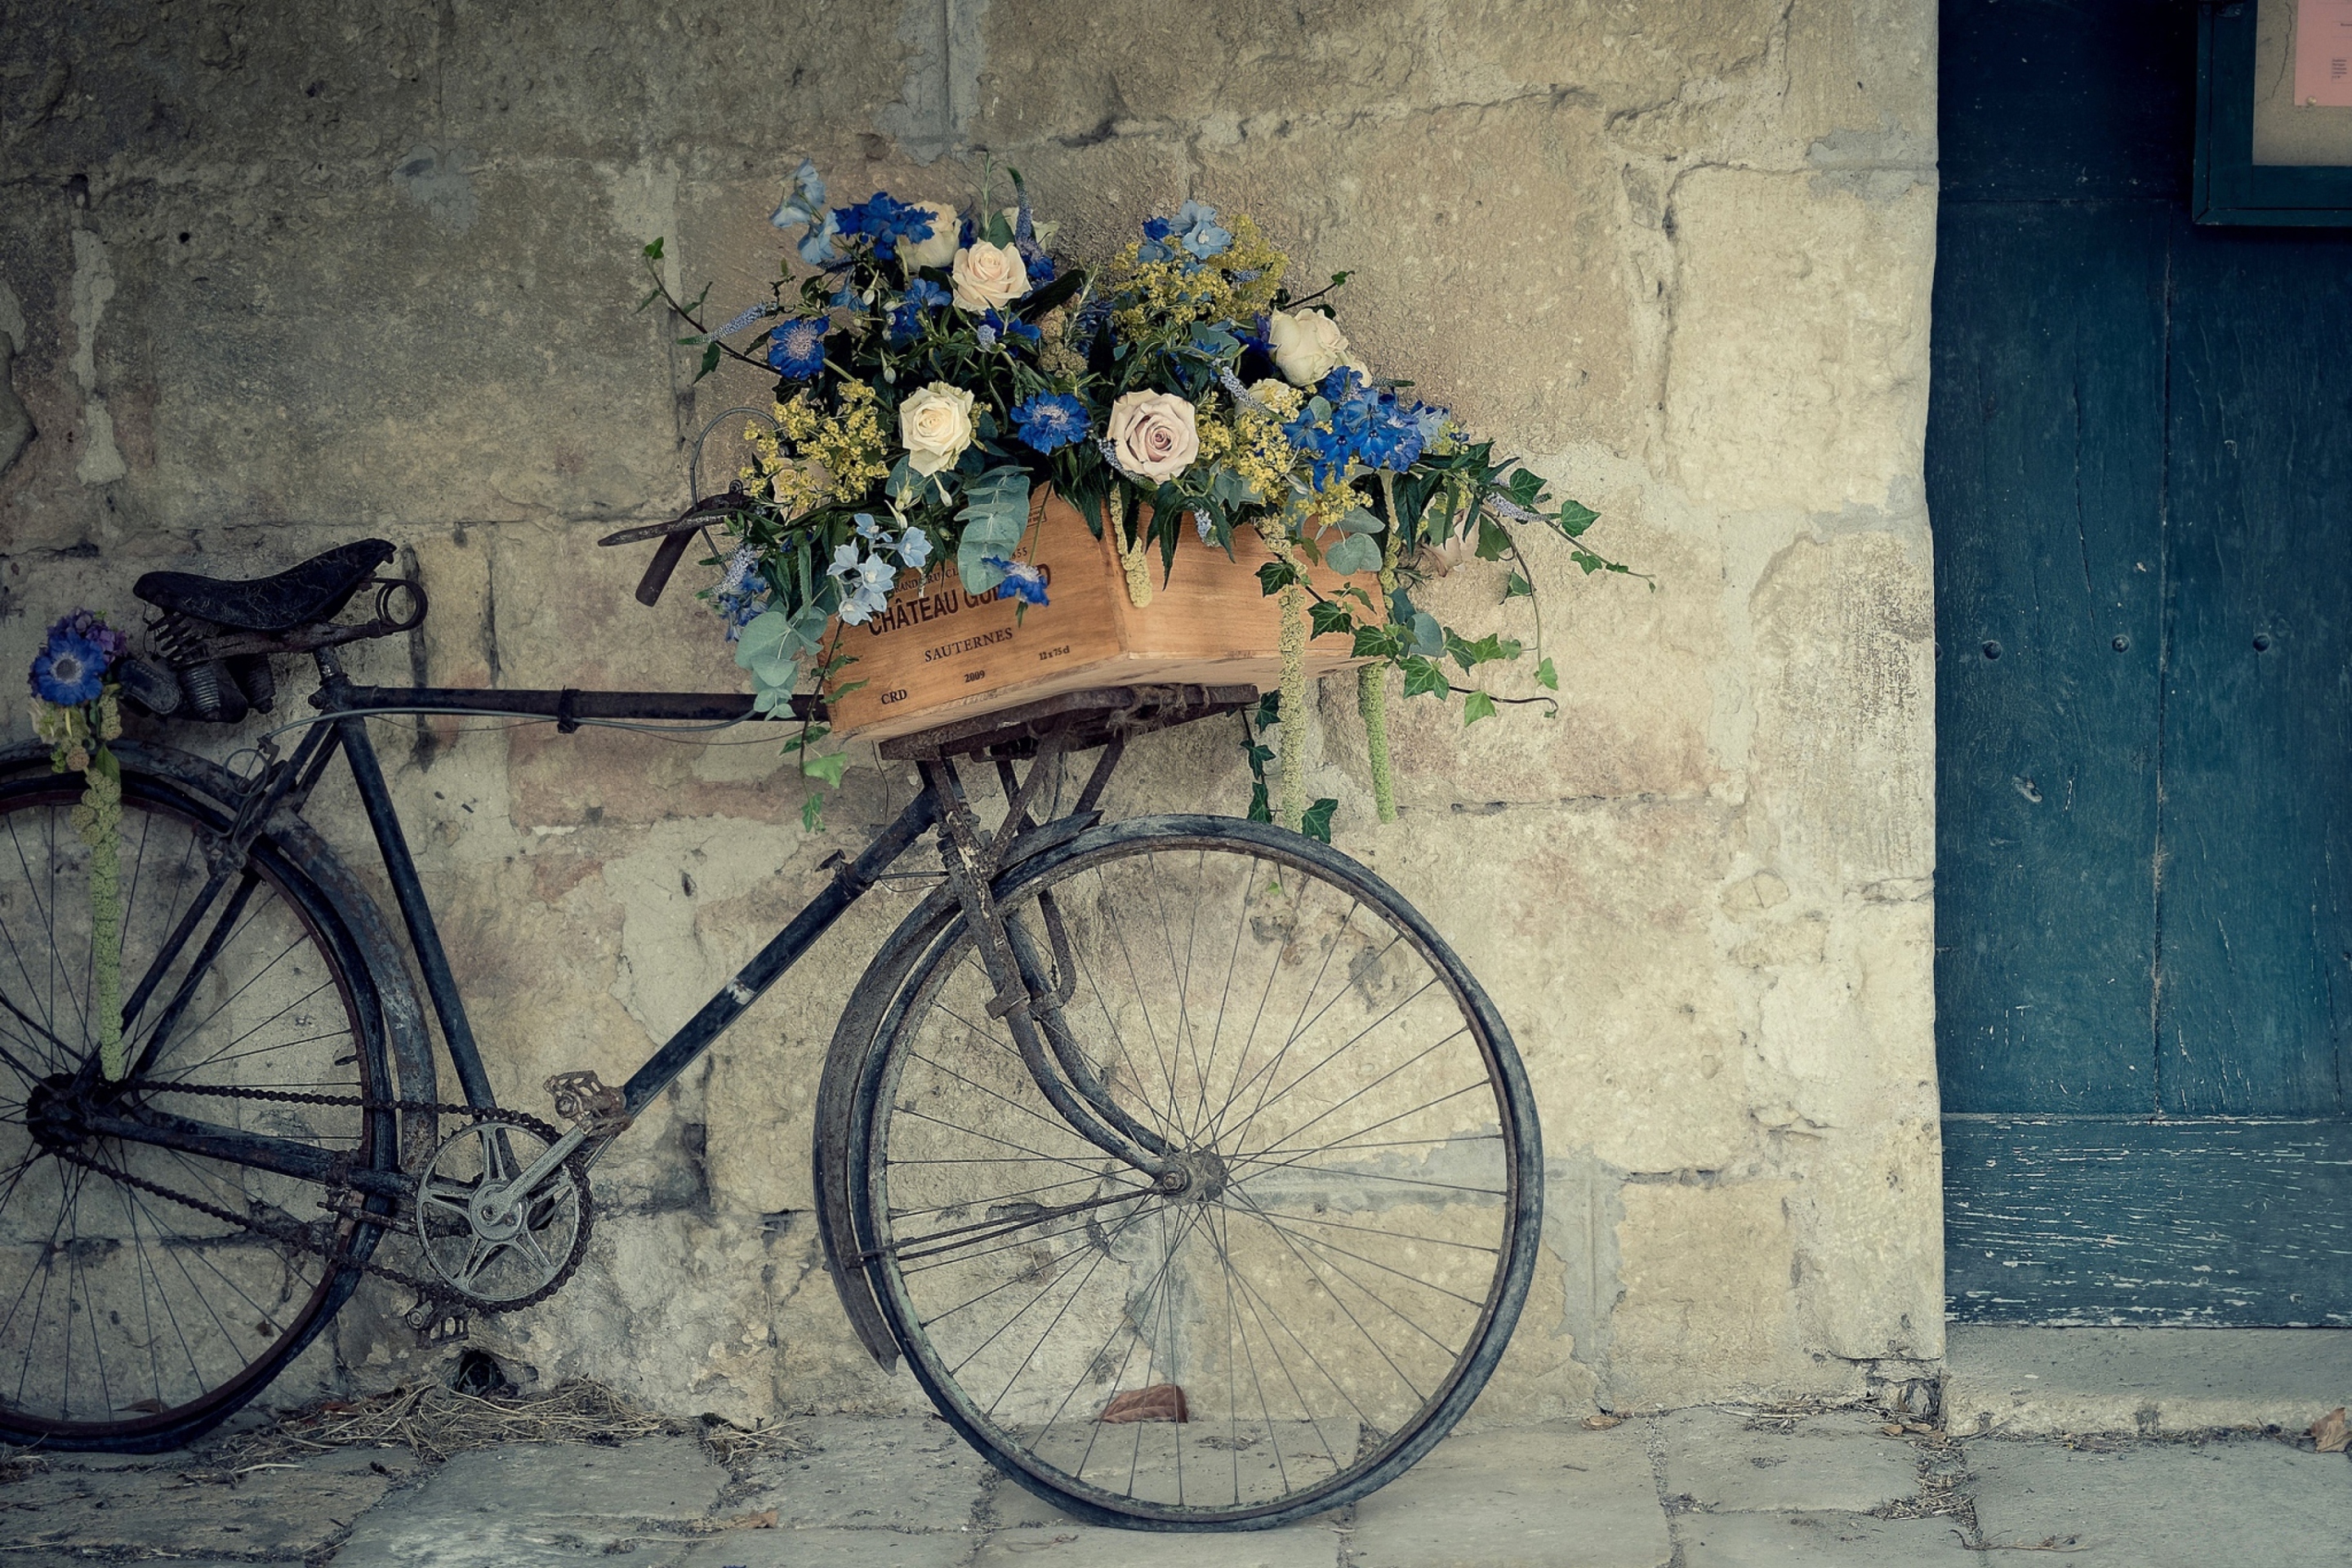 Sfondi Bicycle With Basket Full Of Flowers 2880x1920